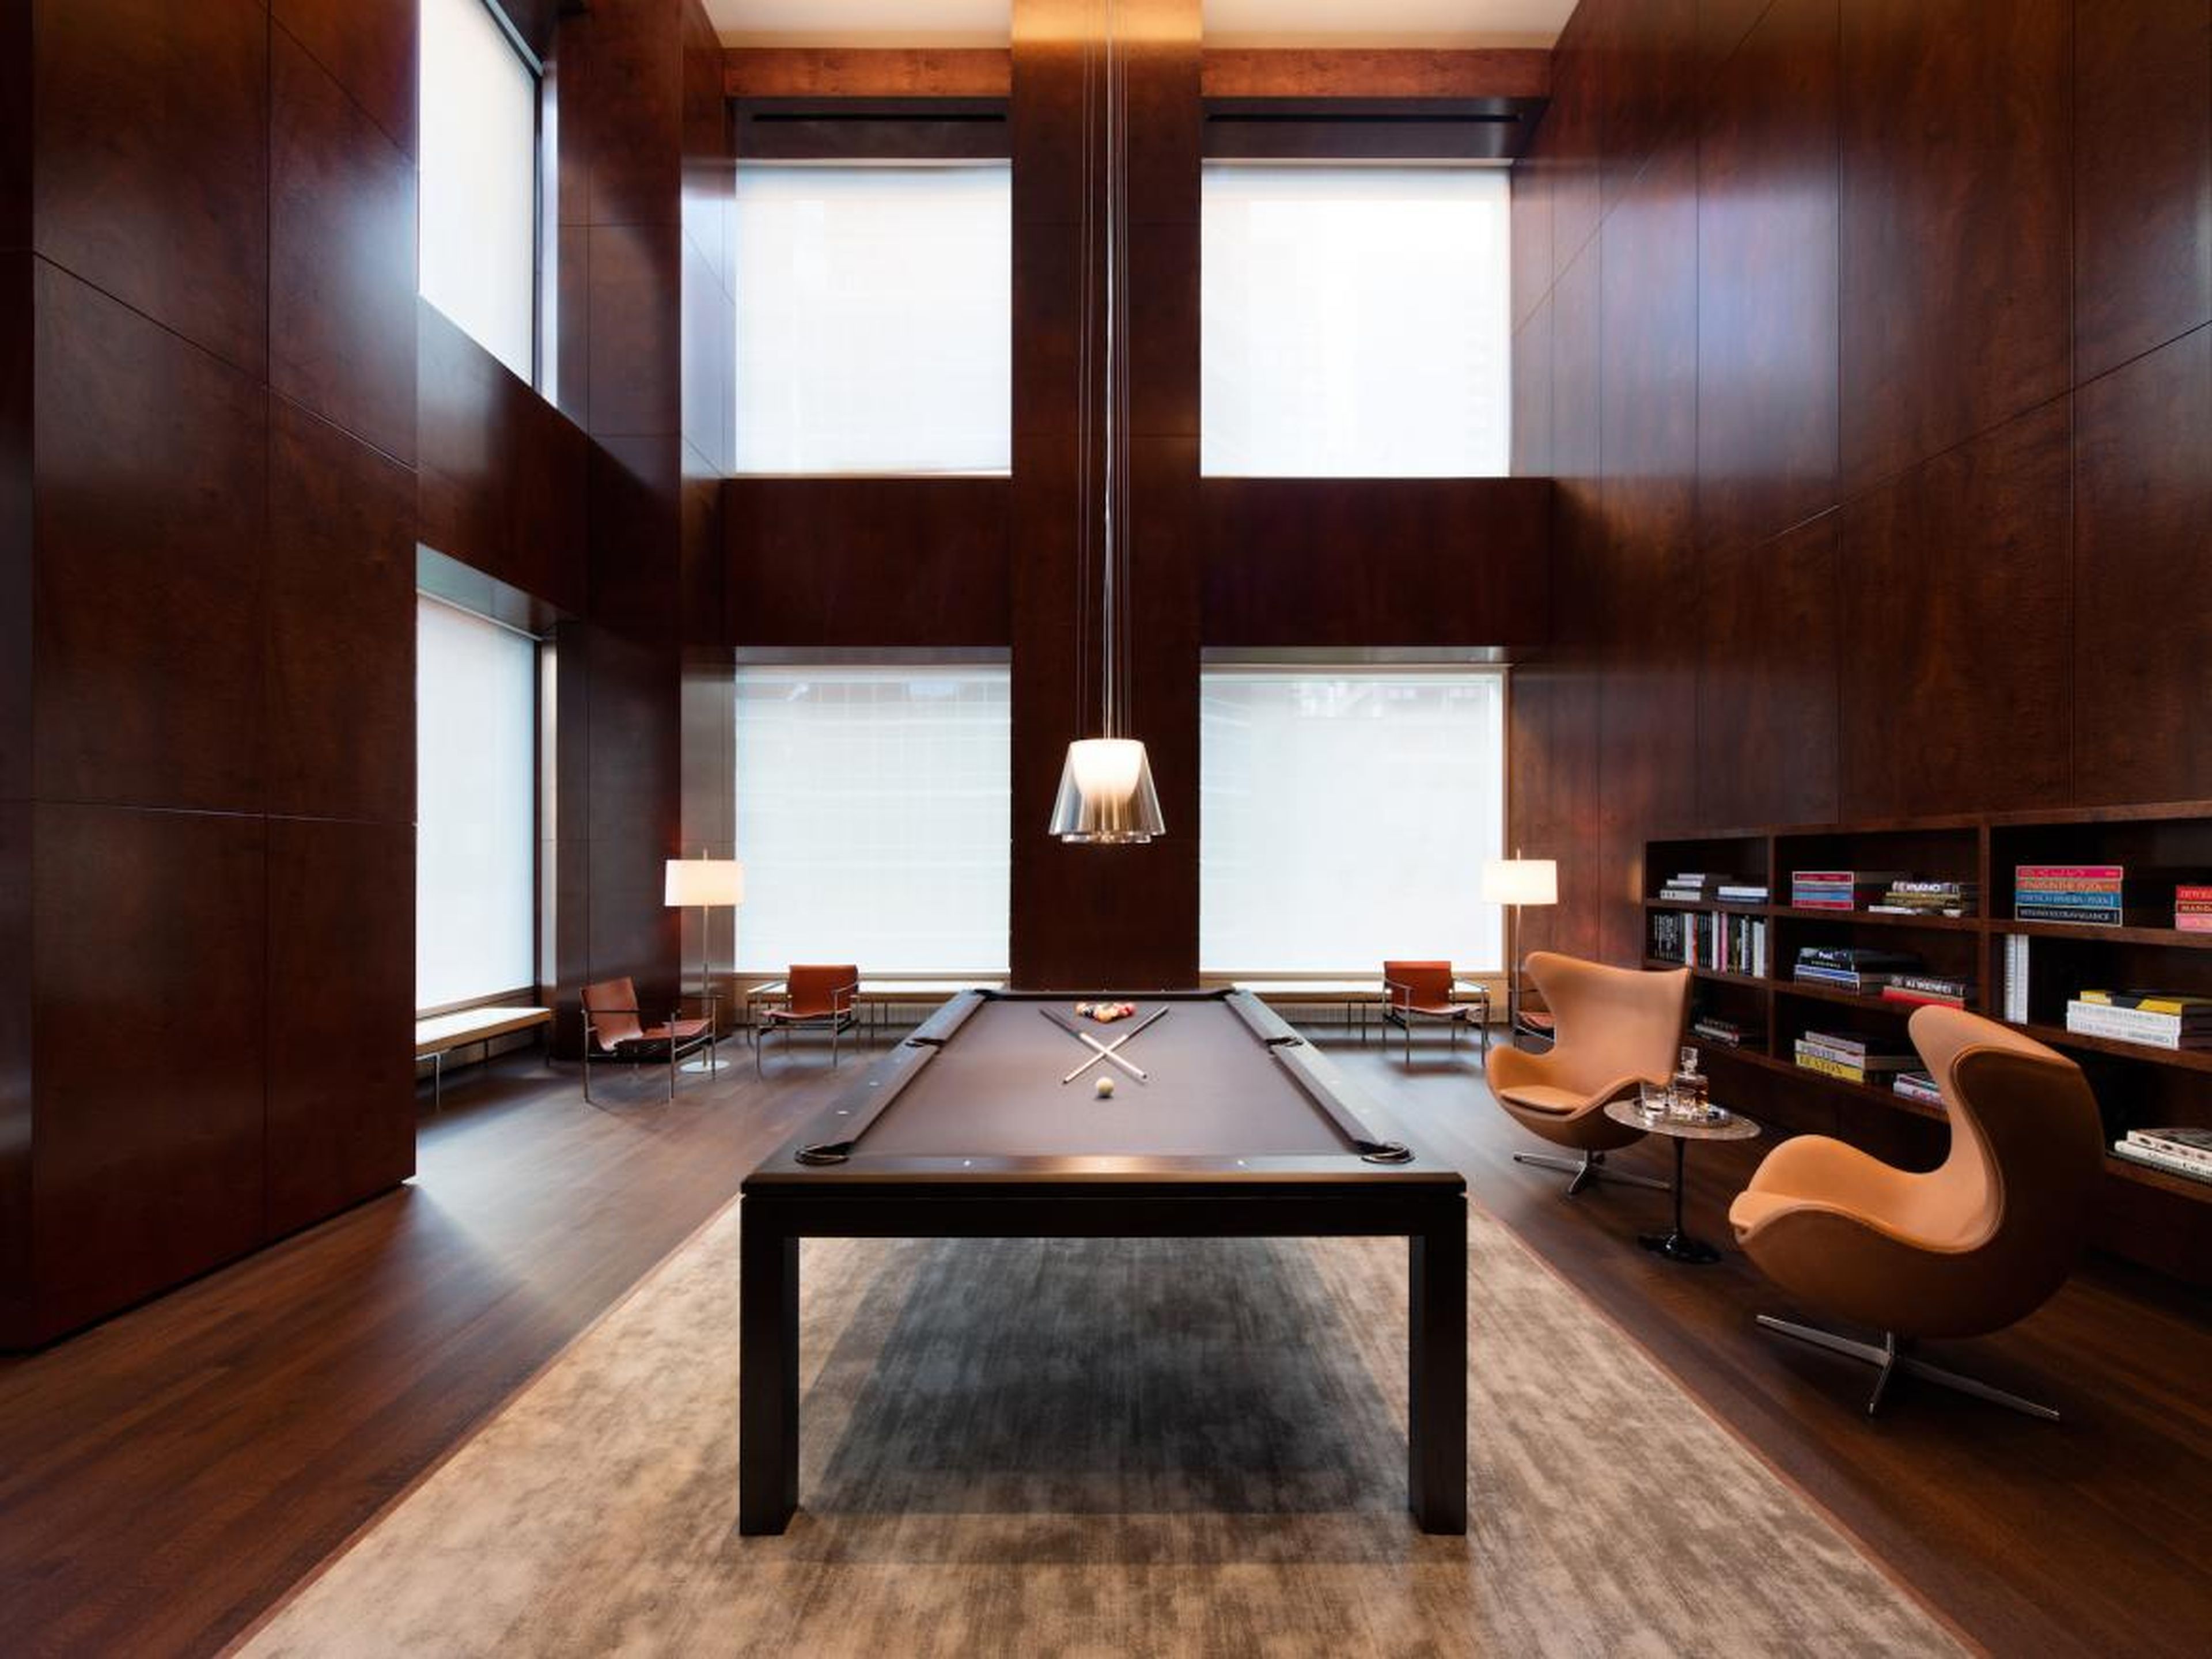 Other amenities at 432 Park include a billiards room and a library ...